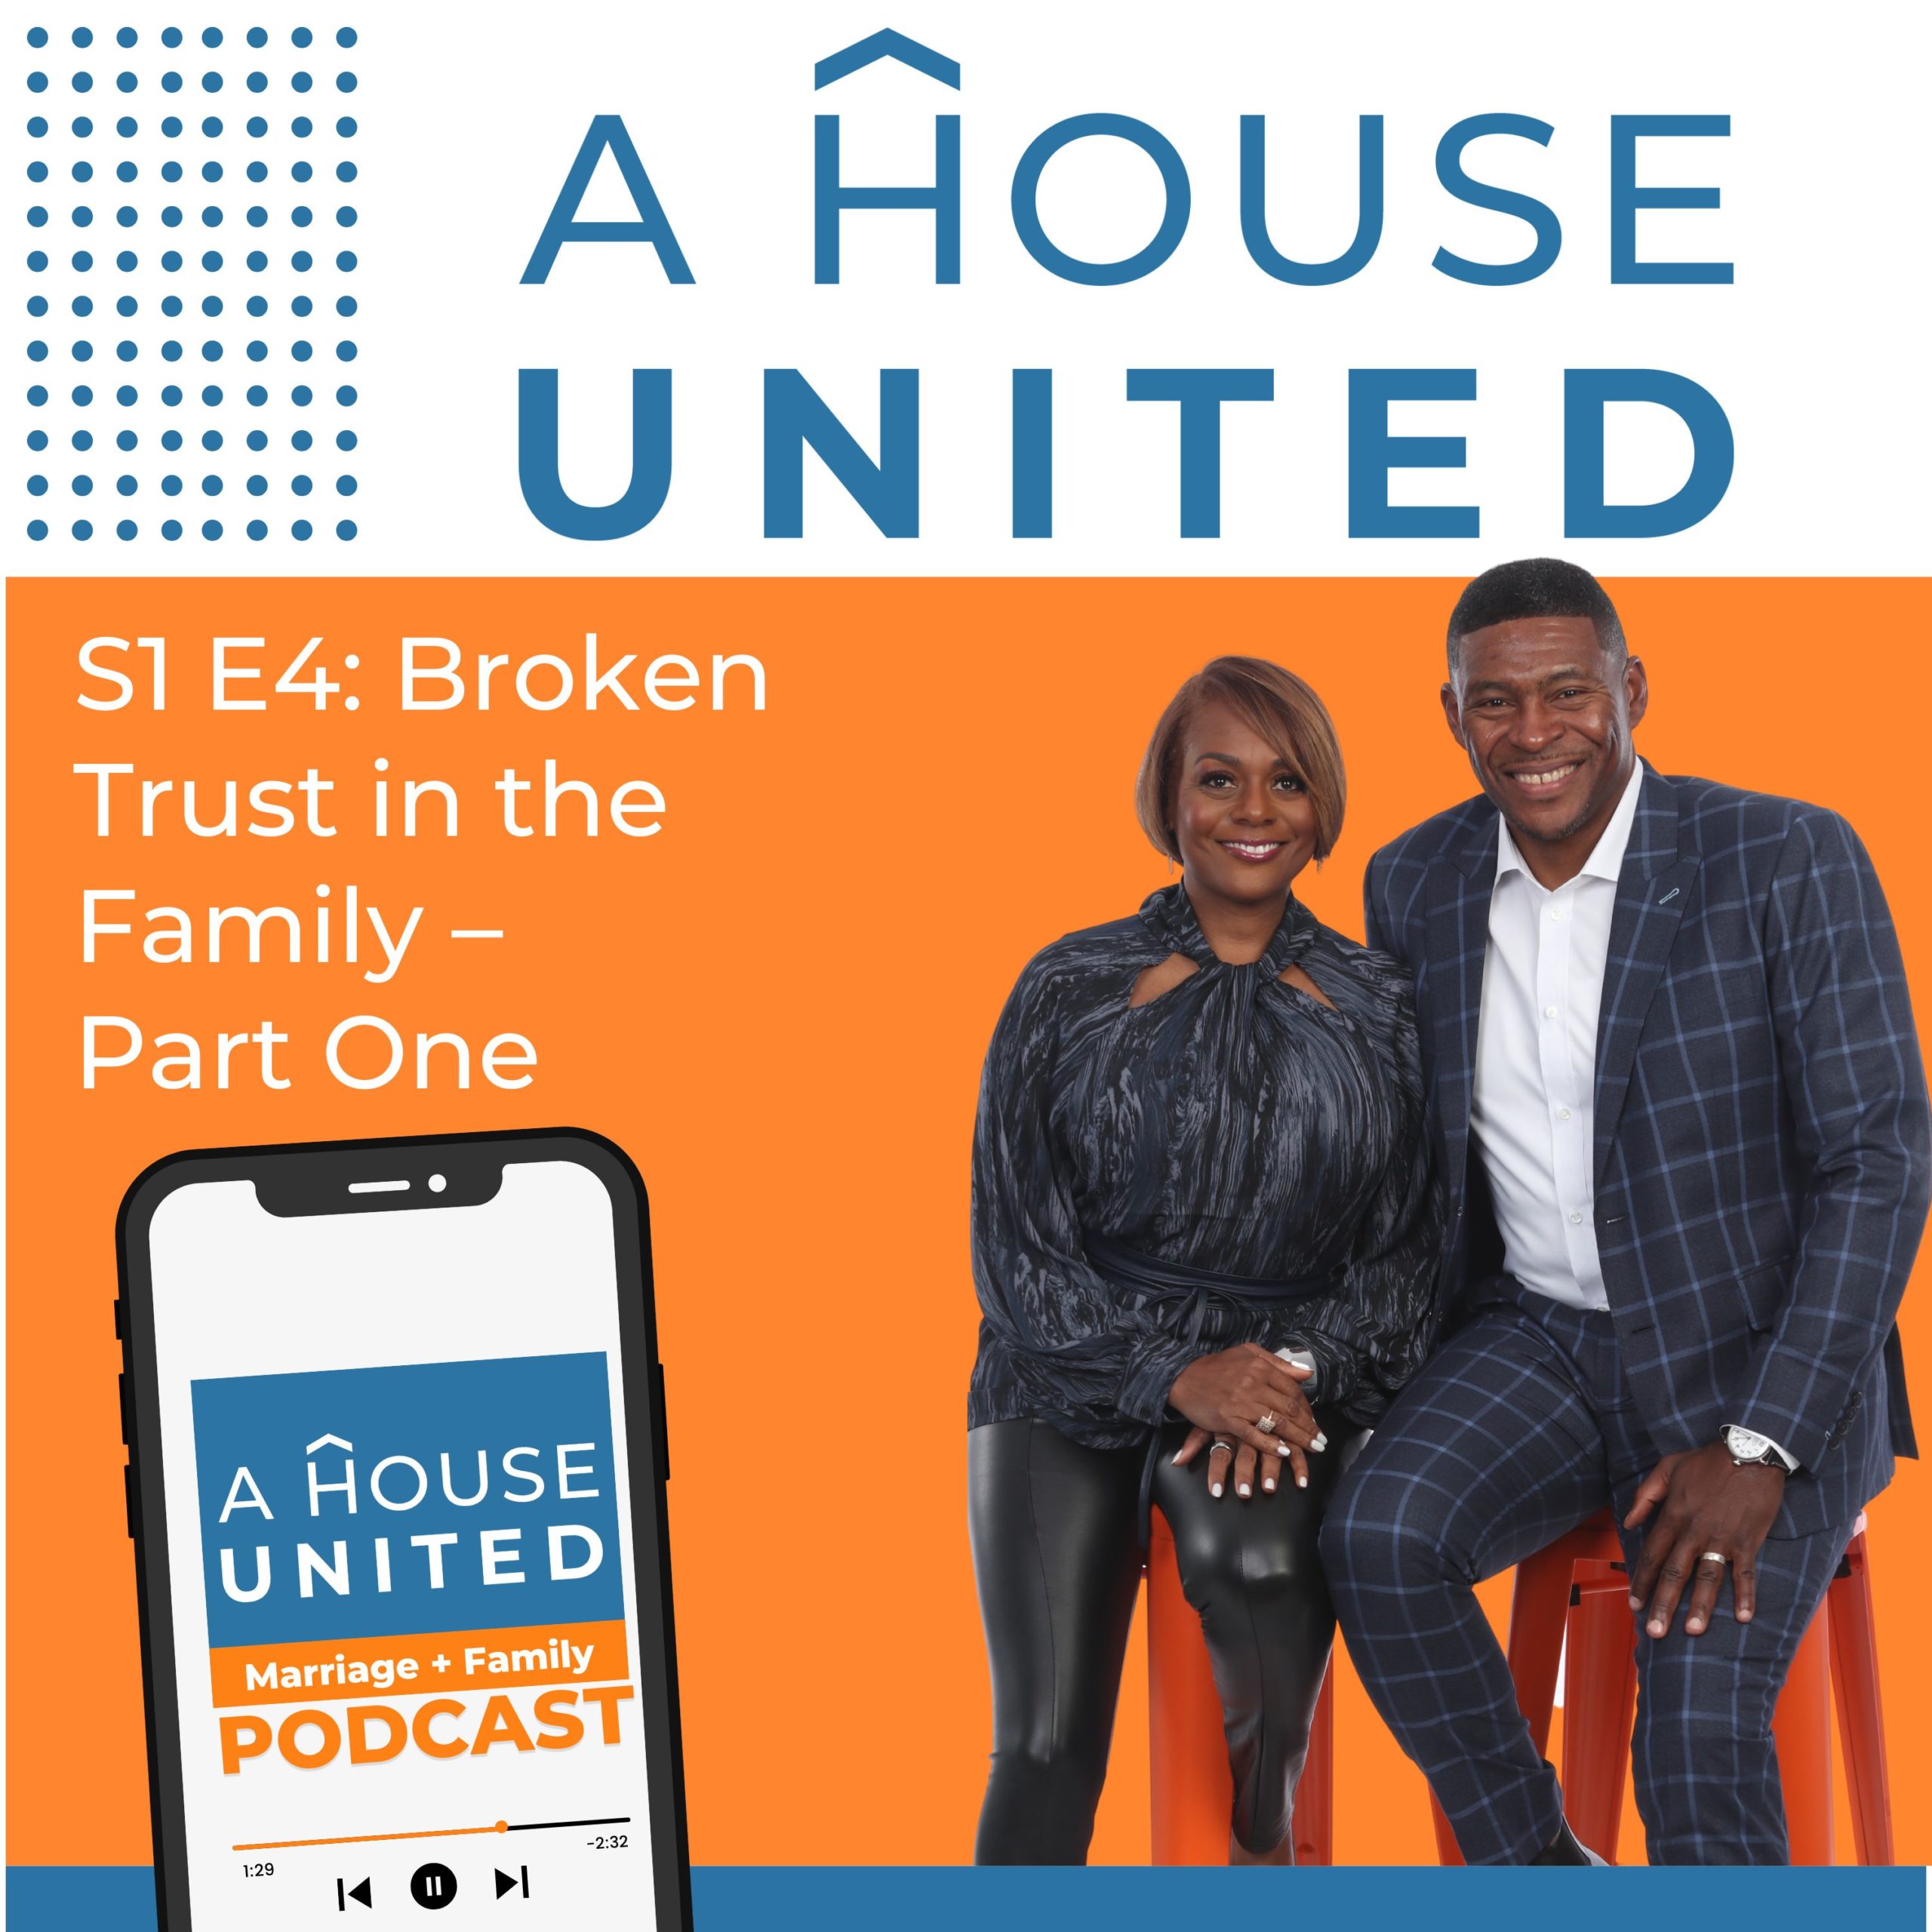 A House United S1 E4: Broken Trust in the Family – Part One